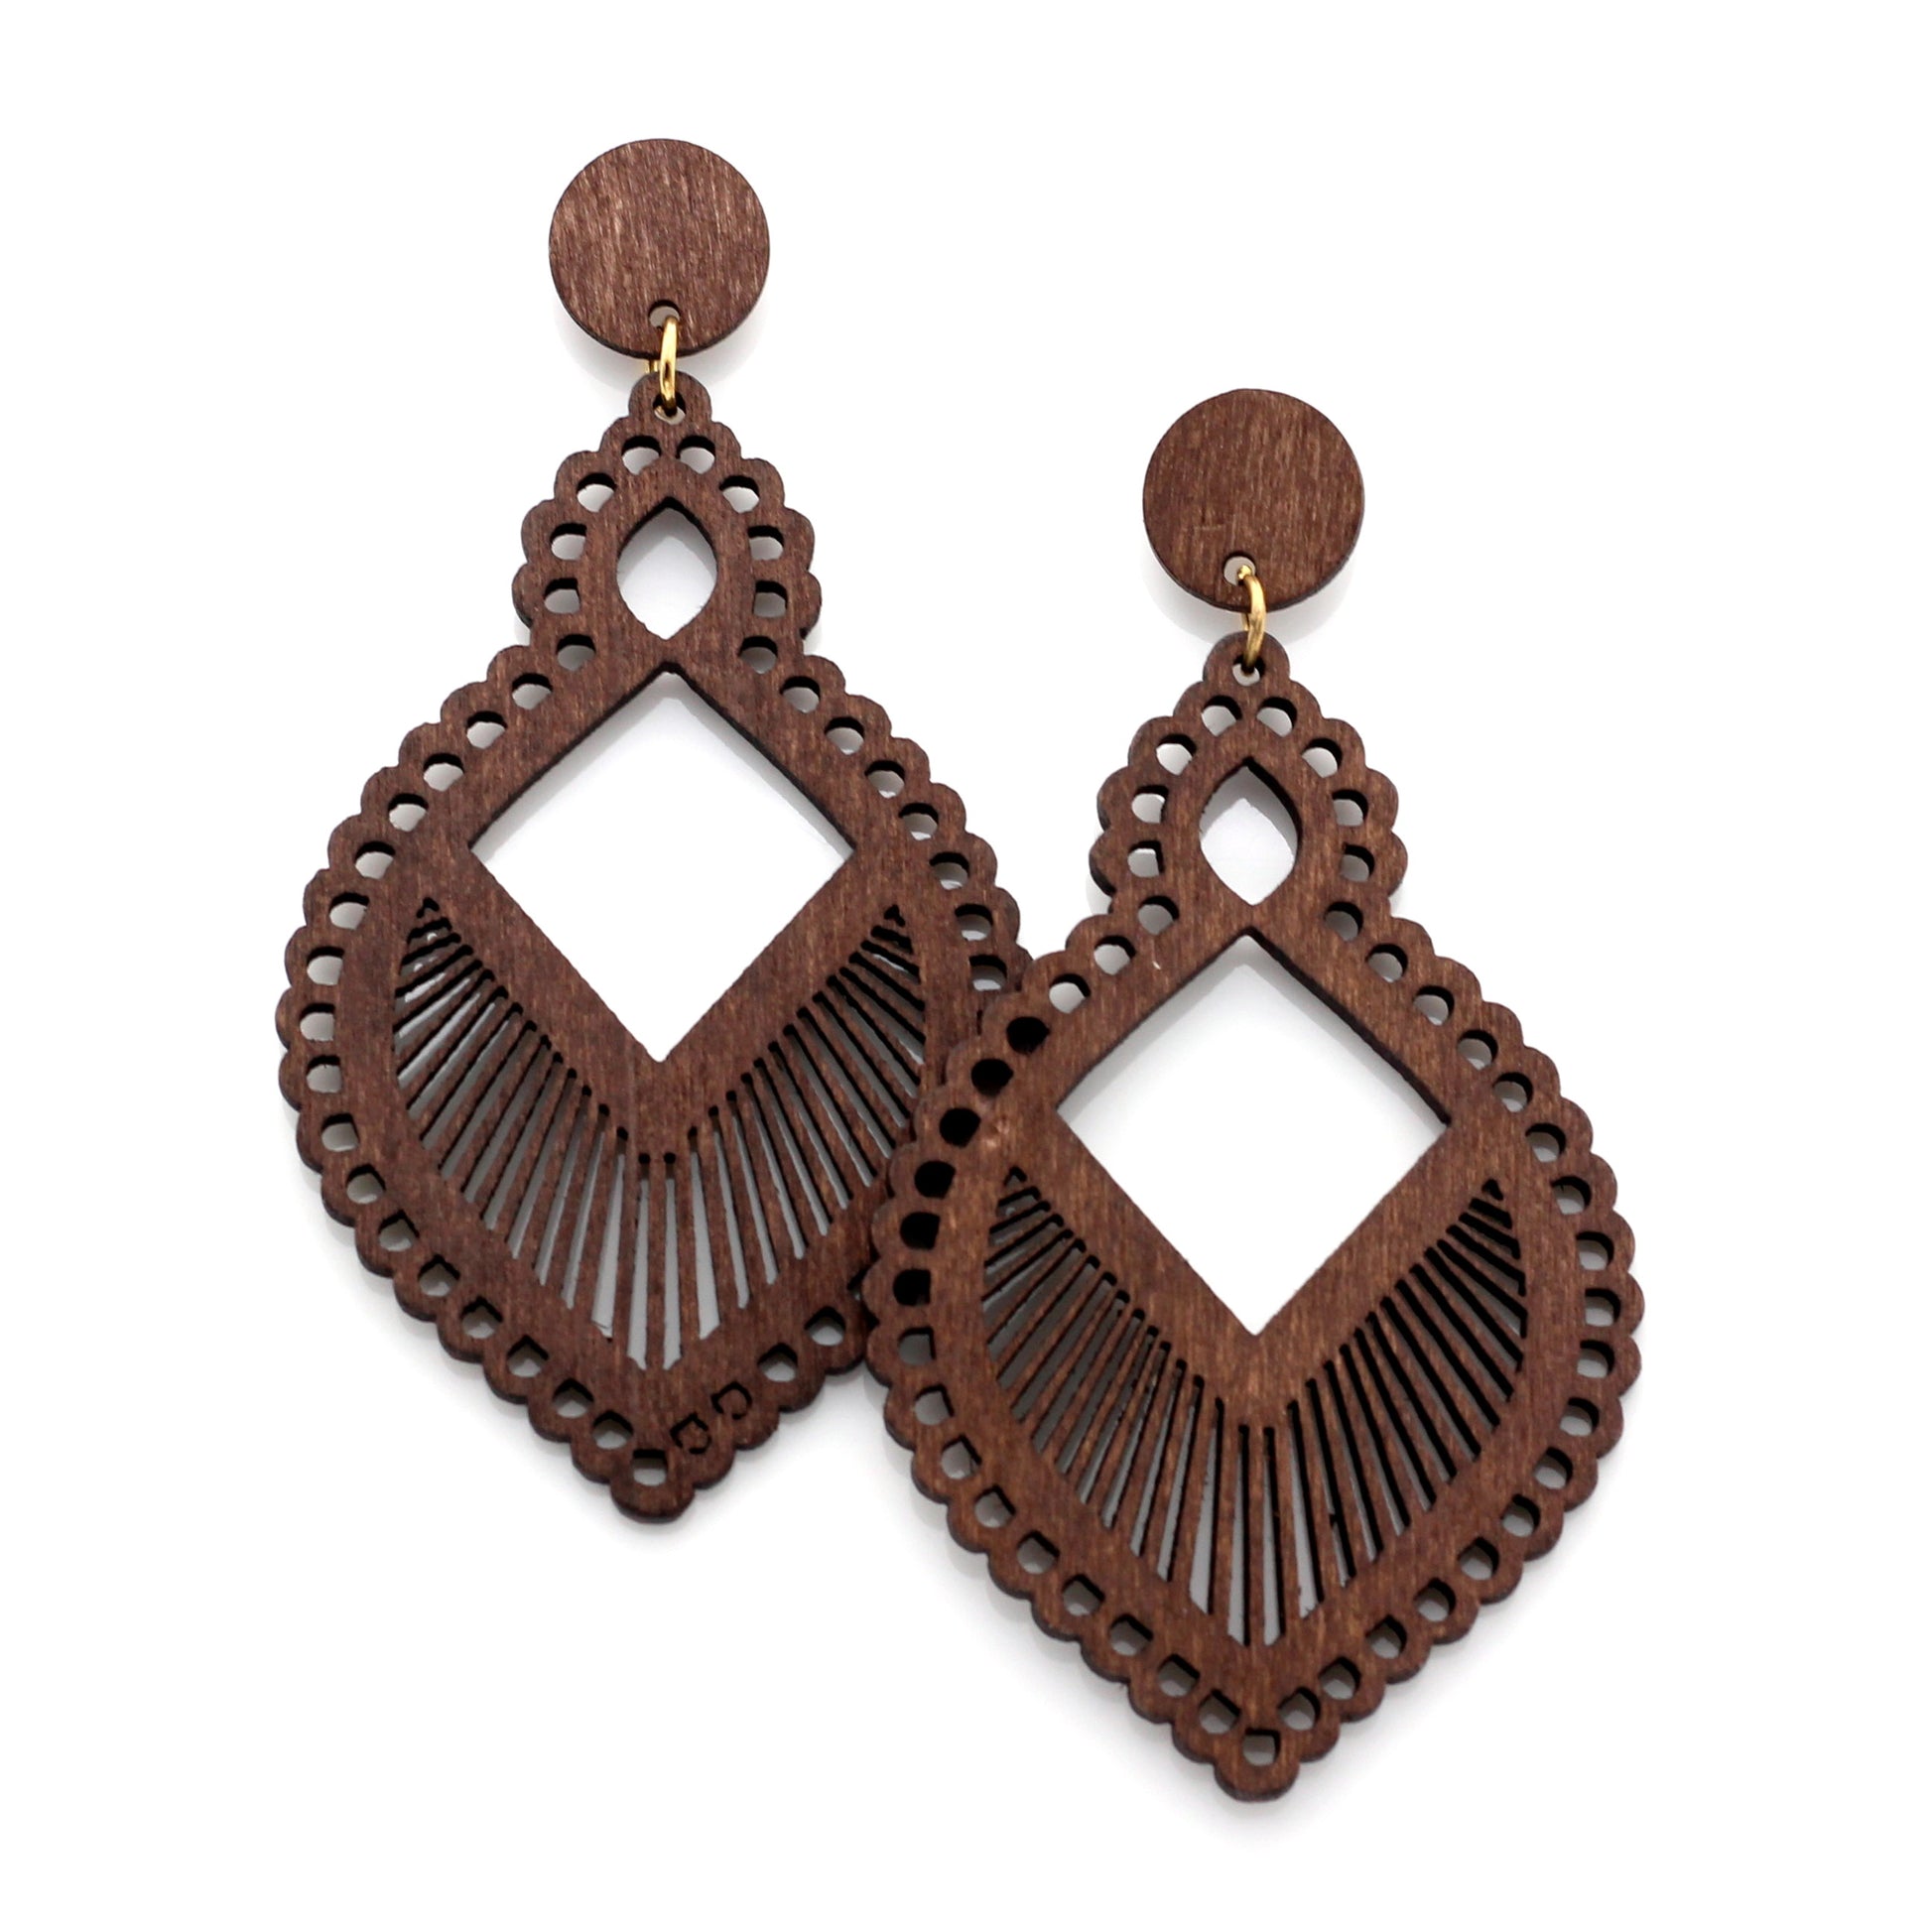 Wood earrings by Hashtag Bamboo